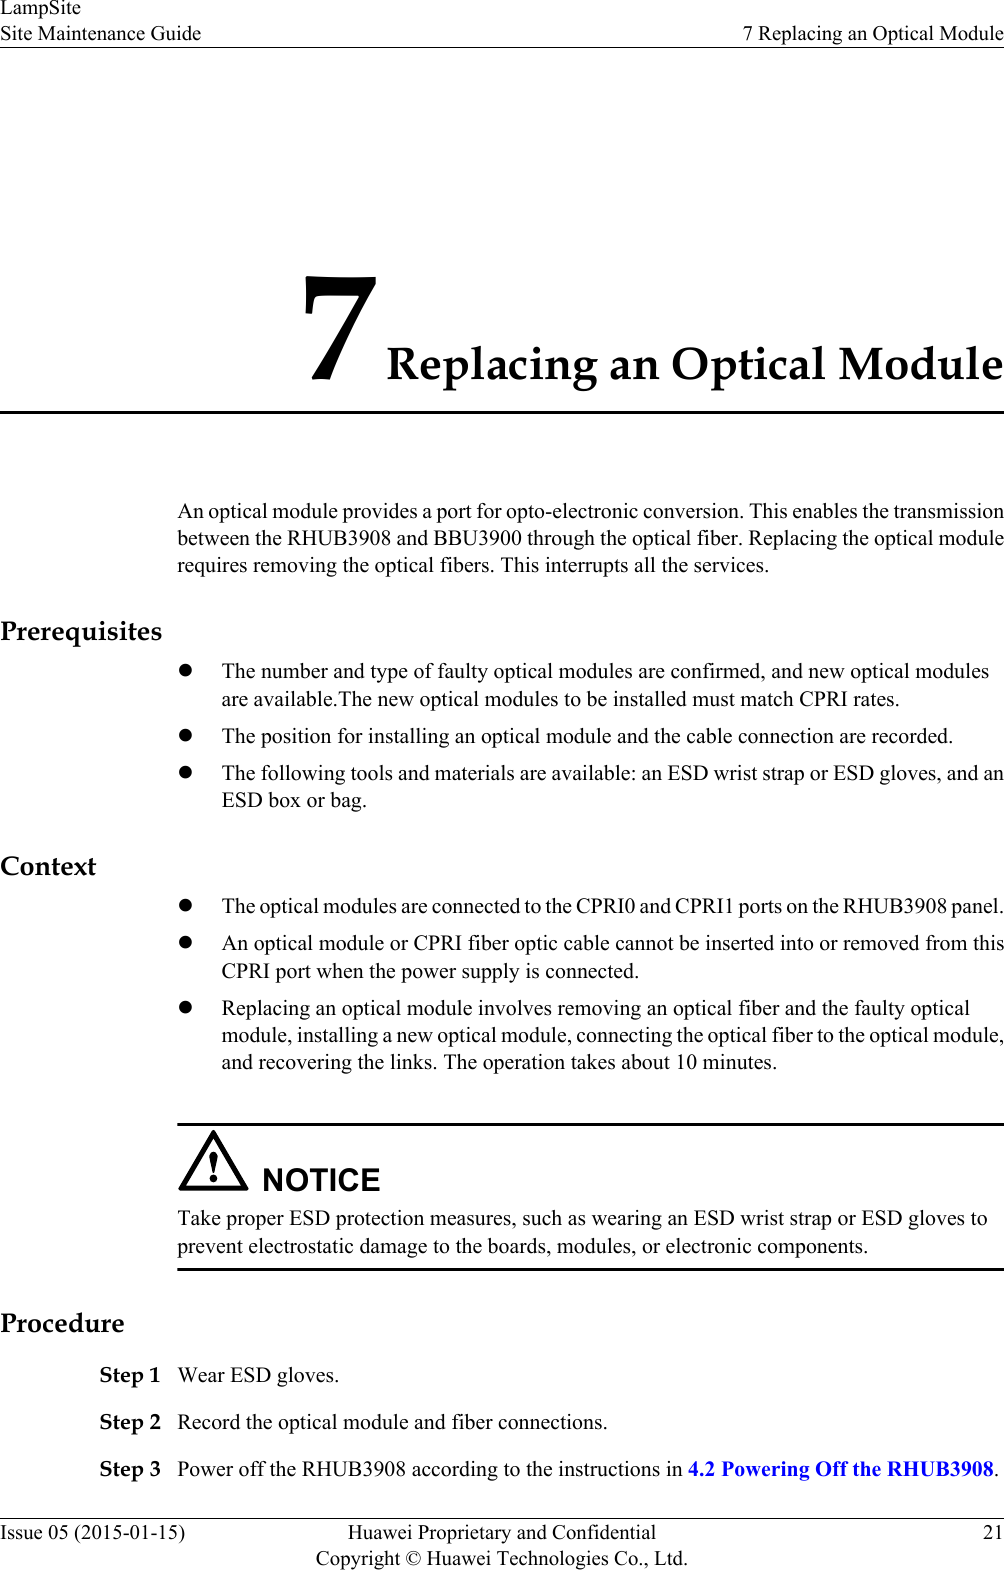 7 Replacing an Optical ModuleAn optical module provides a port for opto-electronic conversion. This enables the transmissionbetween the RHUB3908 and BBU3900 through the optical fiber. Replacing the optical modulerequires removing the optical fibers. This interrupts all the services.PrerequisiteslThe number and type of faulty optical modules are confirmed, and new optical modulesare available.The new optical modules to be installed must match CPRI rates.lThe position for installing an optical module and the cable connection are recorded.lThe following tools and materials are available: an ESD wrist strap or ESD gloves, and anESD box or bag.ContextlThe optical modules are connected to the CPRI0 and CPRI1 ports on the RHUB3908 panel.lAn optical module or CPRI fiber optic cable cannot be inserted into or removed from thisCPRI port when the power supply is connected.lReplacing an optical module involves removing an optical fiber and the faulty opticalmodule, installing a new optical module, connecting the optical fiber to the optical module,and recovering the links. The operation takes about 10 minutes.NOTICETake proper ESD protection measures, such as wearing an ESD wrist strap or ESD gloves toprevent electrostatic damage to the boards, modules, or electronic components.ProcedureStep 1 Wear ESD gloves.Step 2 Record the optical module and fiber connections.Step 3 Power off the RHUB3908 according to the instructions in 4.2 Powering Off the RHUB3908.LampSiteSite Maintenance Guide 7 Replacing an Optical ModuleIssue 05 (2015-01-15) Huawei Proprietary and ConfidentialCopyright © Huawei Technologies Co., Ltd.21